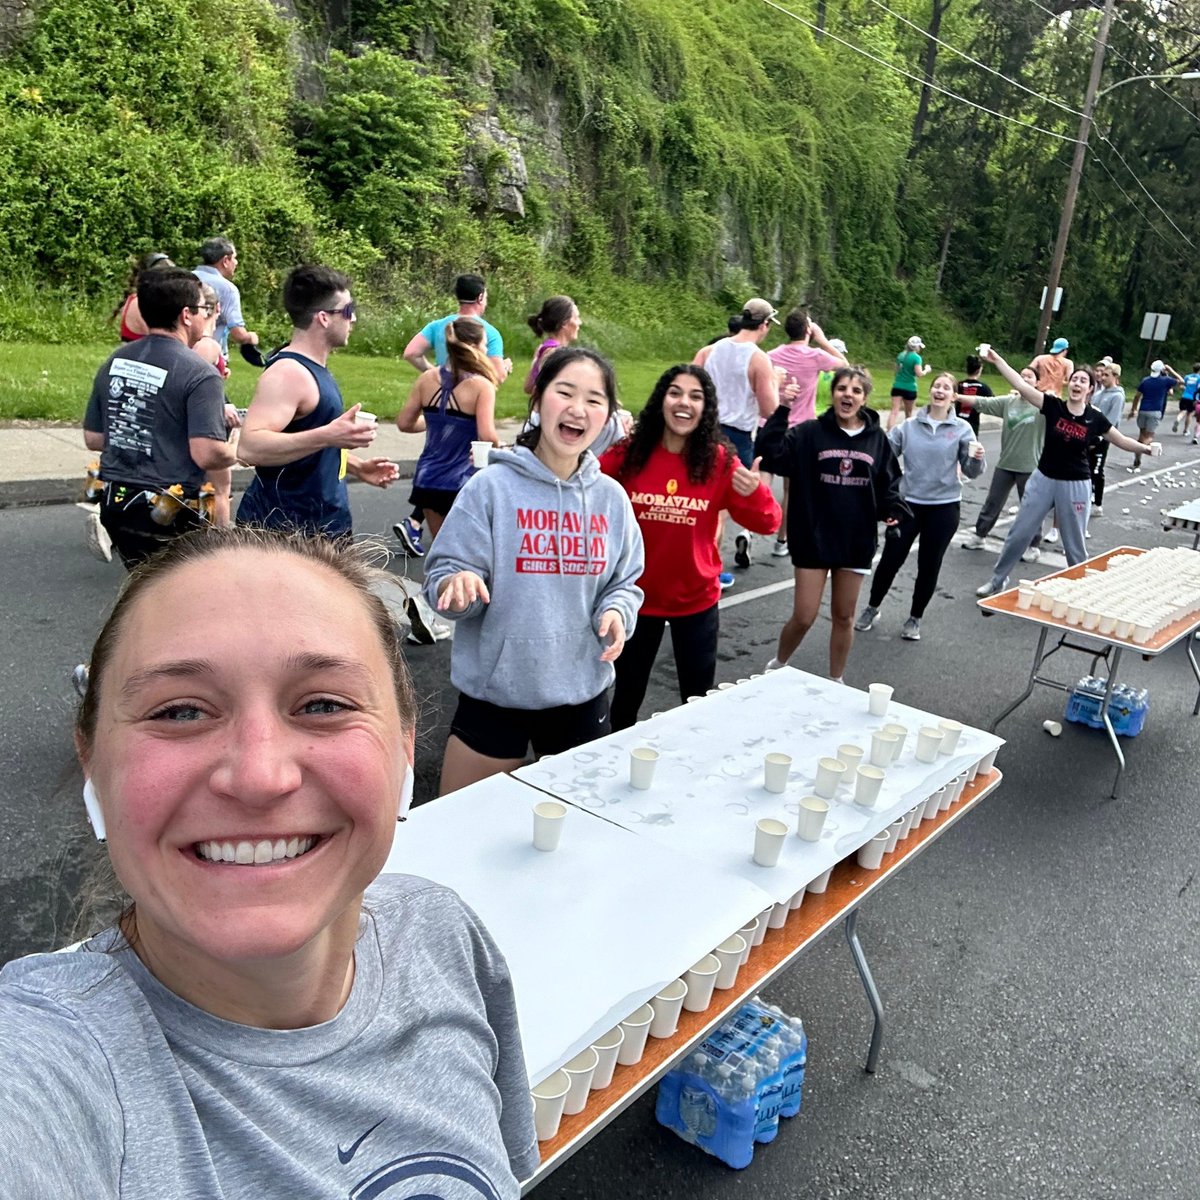 #MoravianAcademy was a proud sponsor of the @stlukeshalf on Sunday! 🎽 Mrs. Panella, Mr. DeCusatis, Megan Dadio '24, and Chelsea Maund '24 competed, and a team of student and faculty volunteers cheered on athletes and kept them hydrated by volunteering at the water table. 🦁